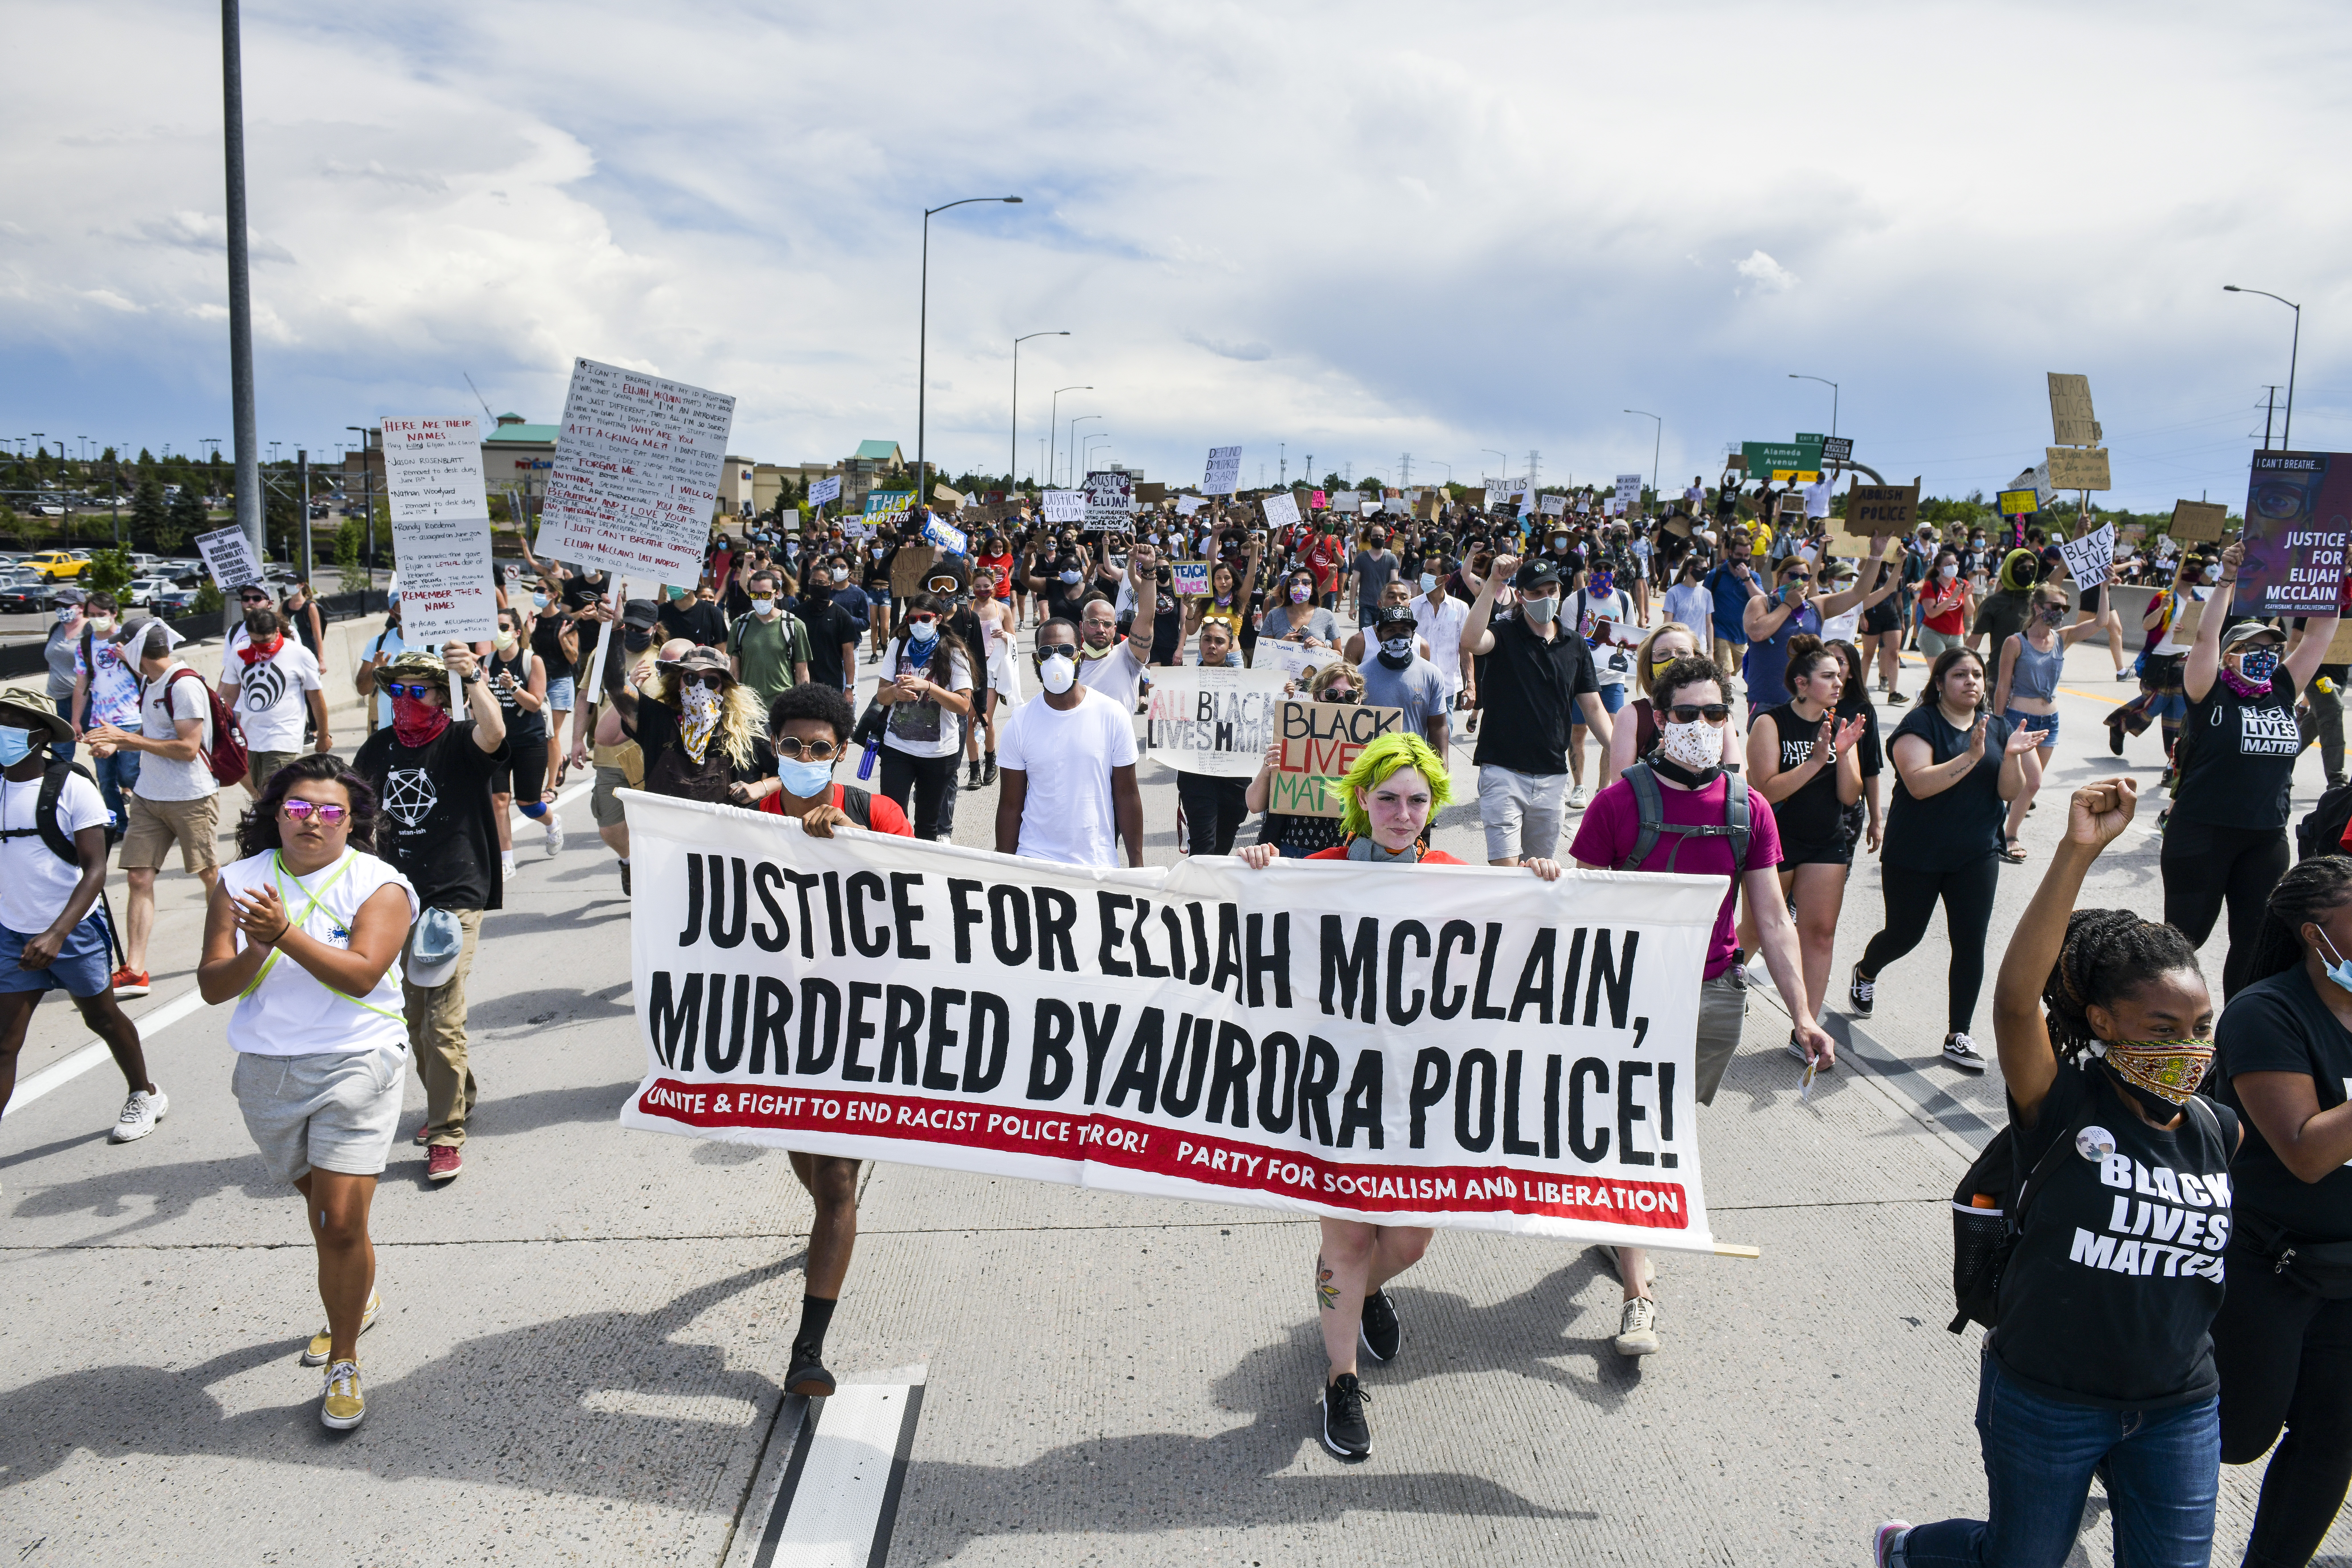 People shut down I-225 in both directions as they demand justice for Elijah McClain on June 27, 2020 in Aurora, Colorado. (Photo by Michael Ciaglo/Getty Images)